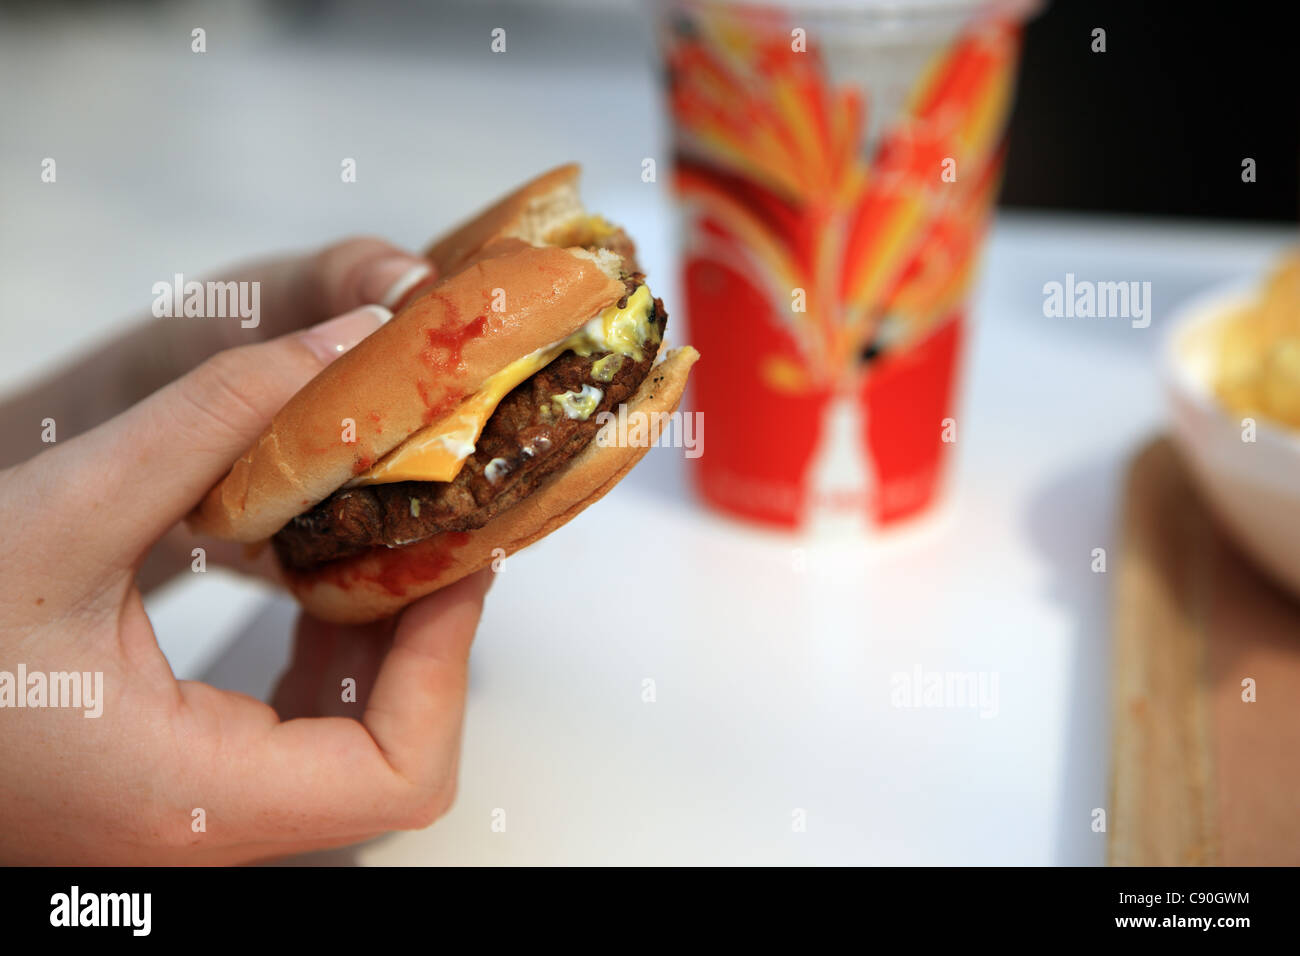 A hand holding a cheese burger with ketchup and soft drink Stock Photo